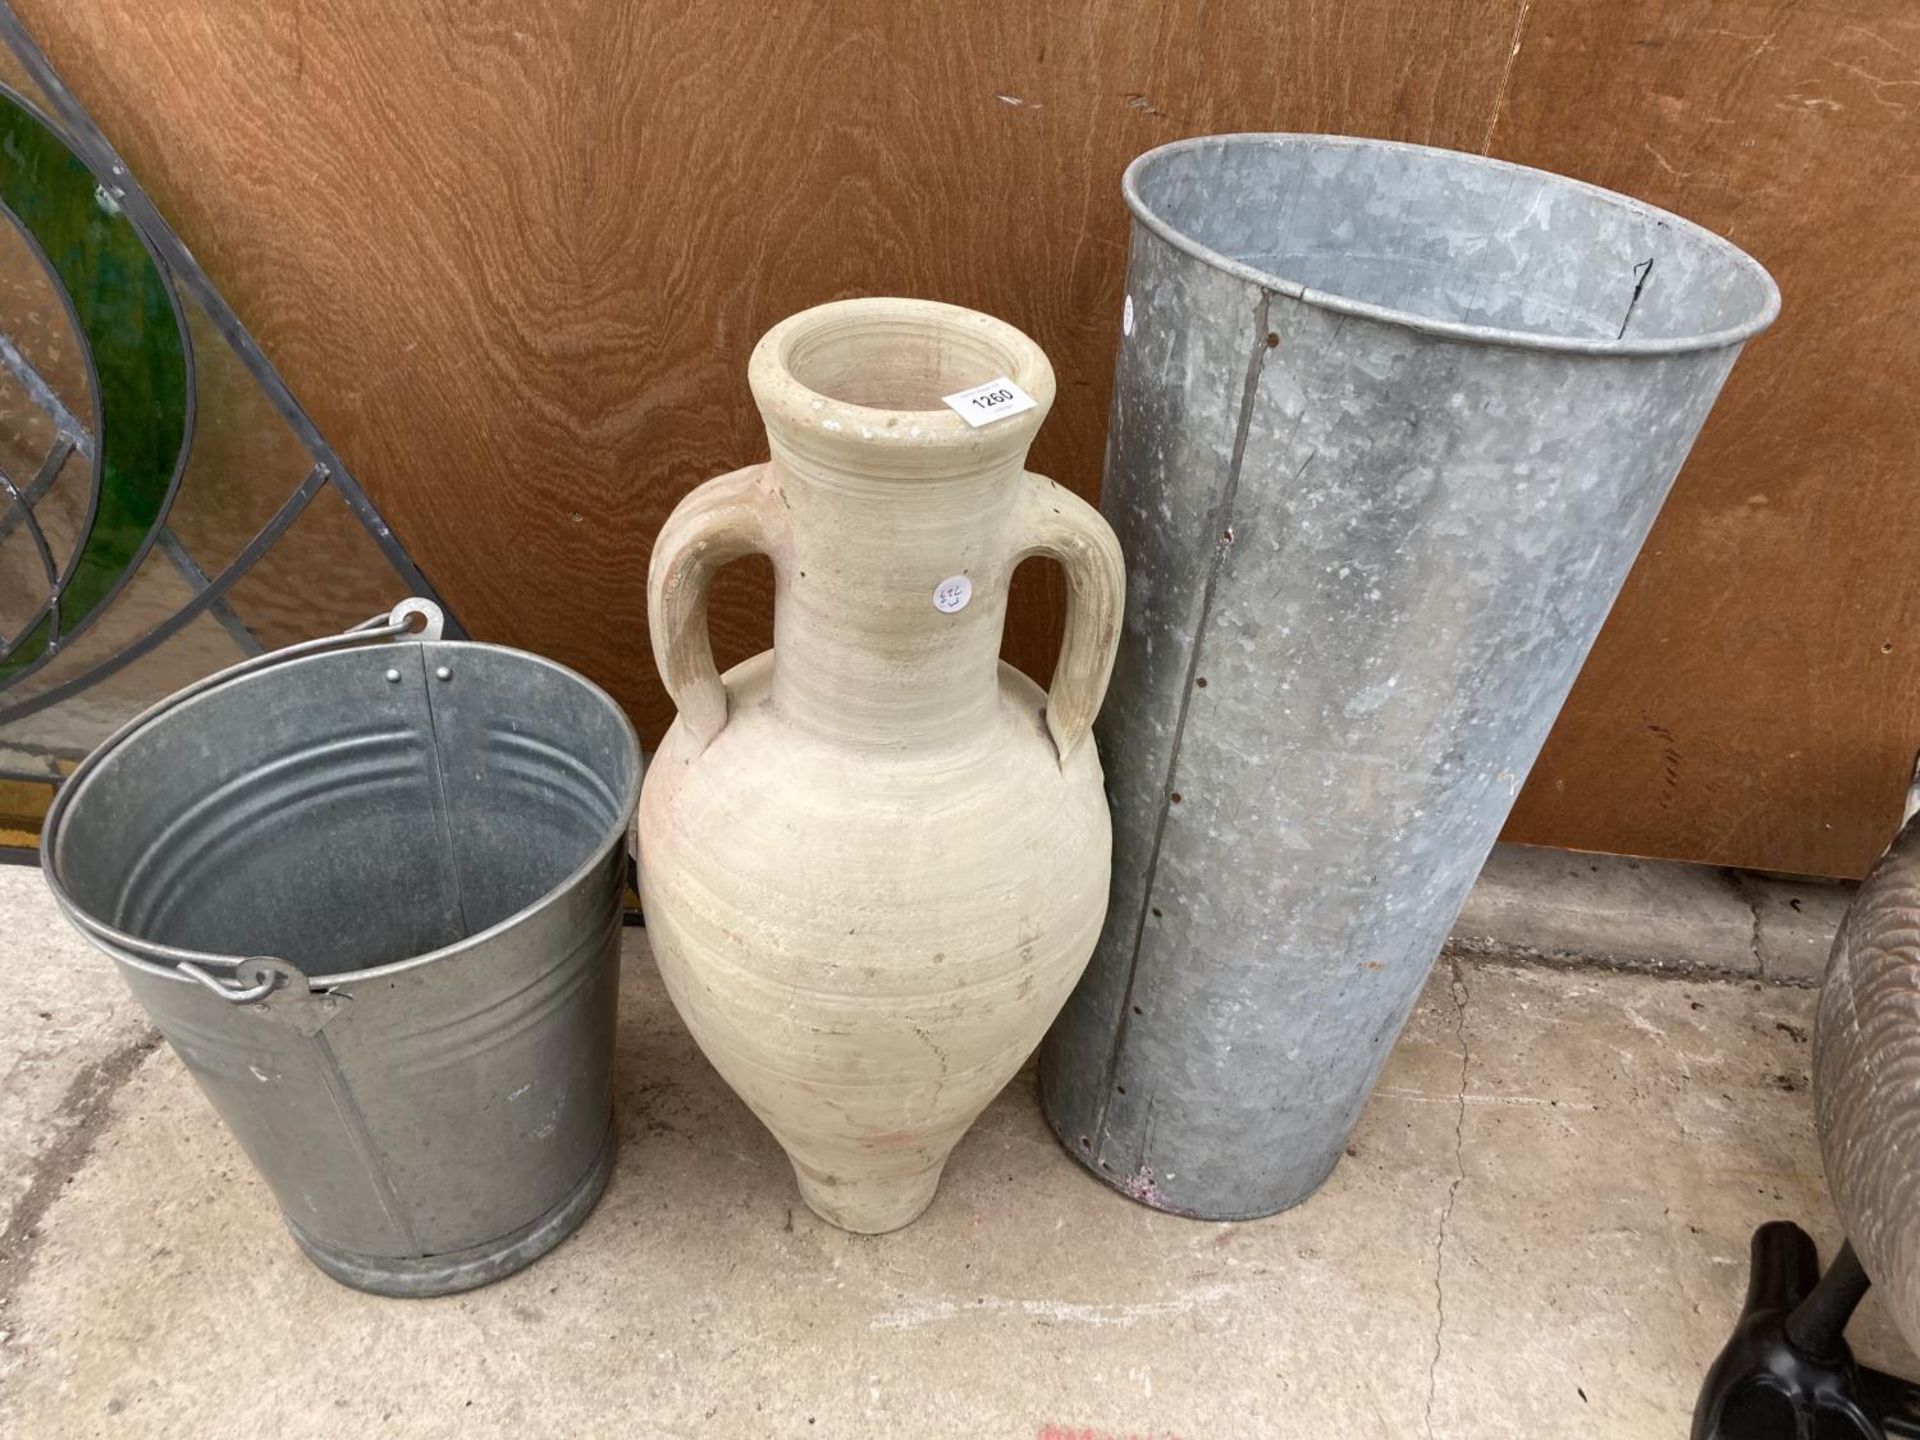 TWO GALAVANISED BUCKETS AND A CERAMIC URN VASE - Image 2 of 10